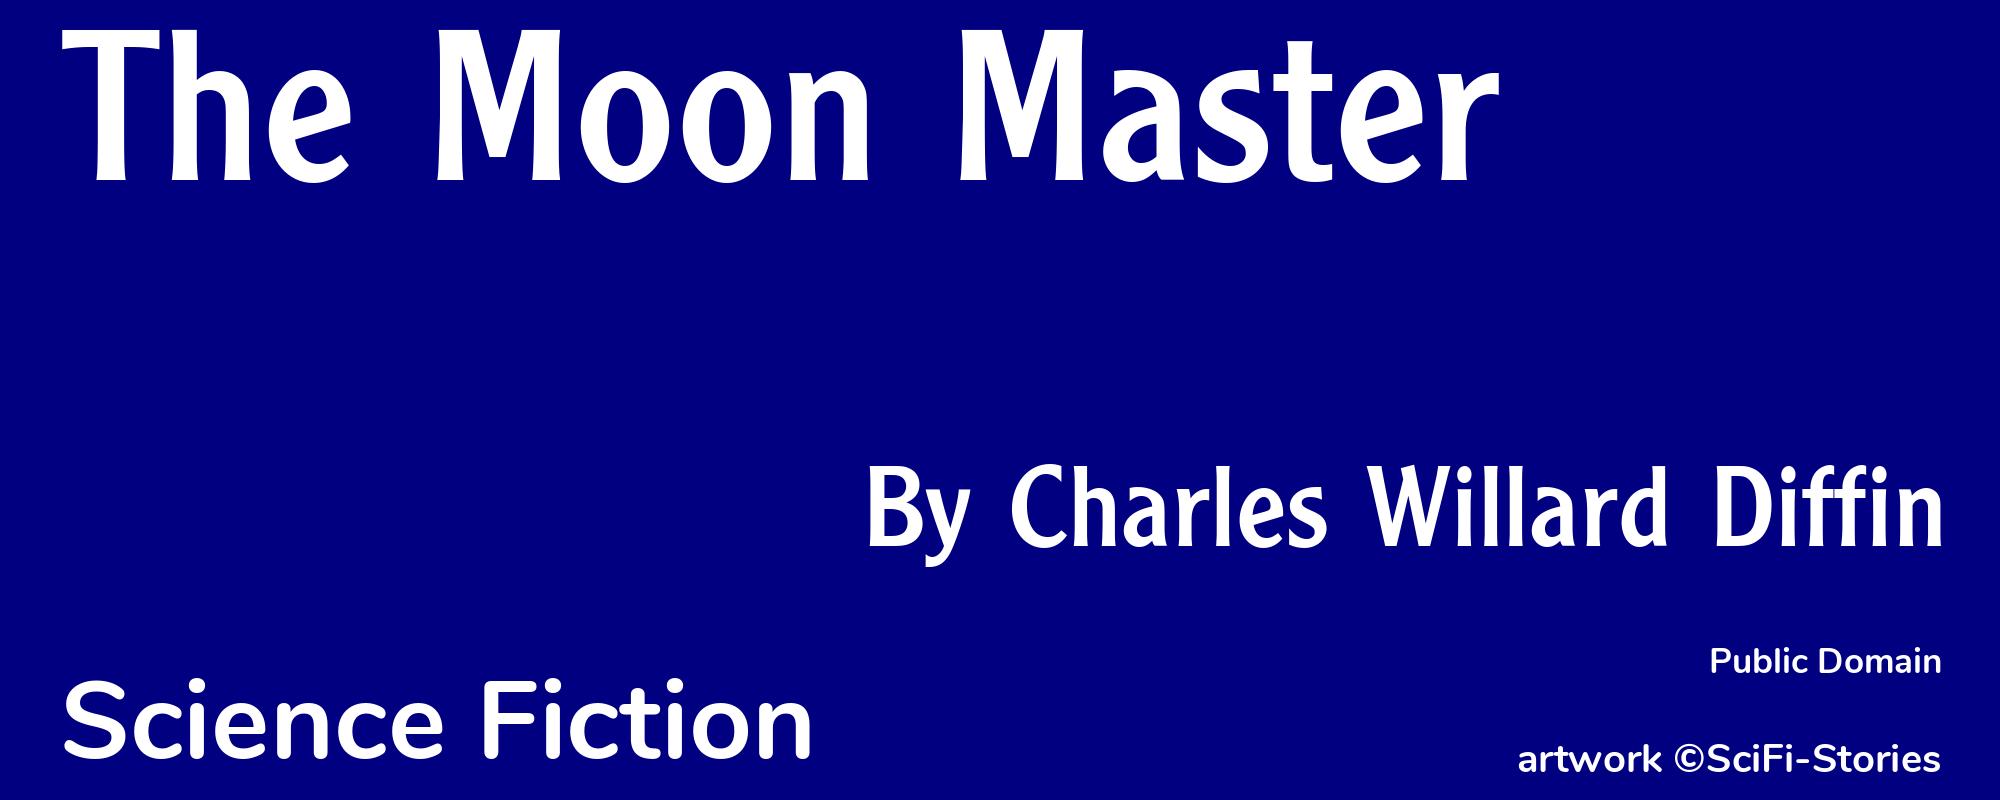 The Moon Master - Cover